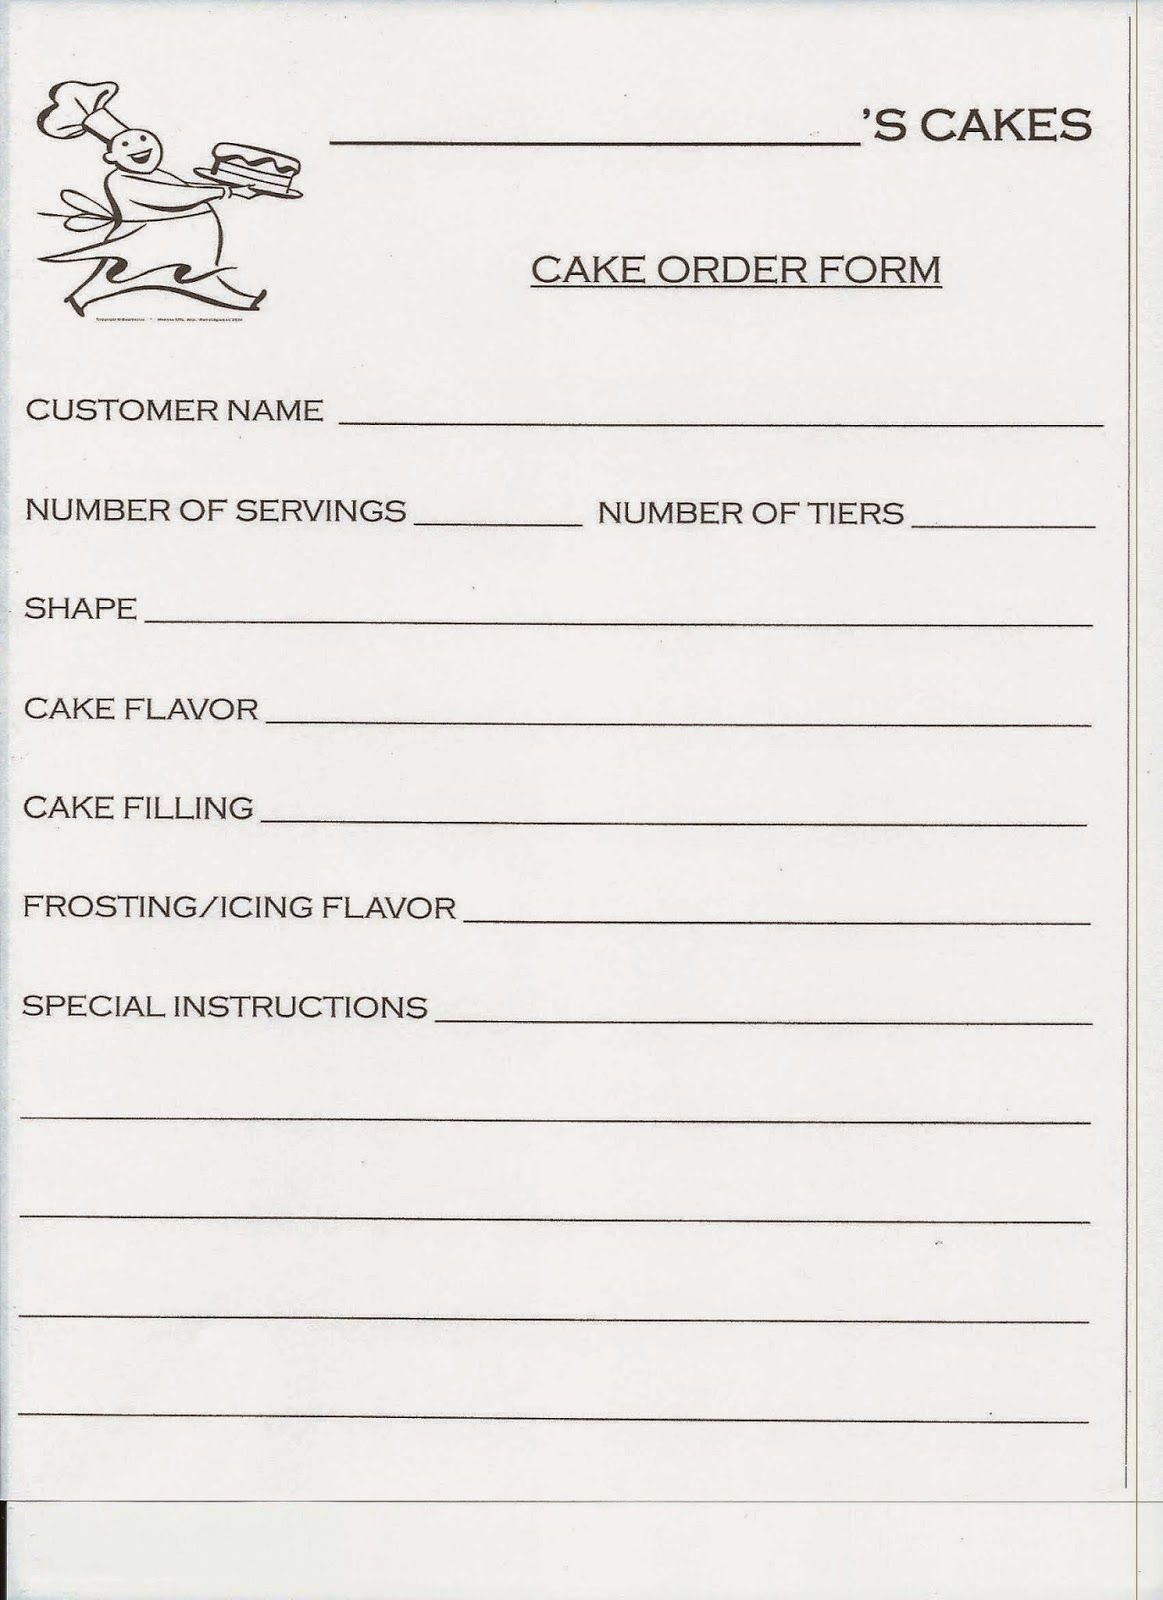 Cake order forms Printable Luxury Spark and All Jake Bakes Cakes Cake order form